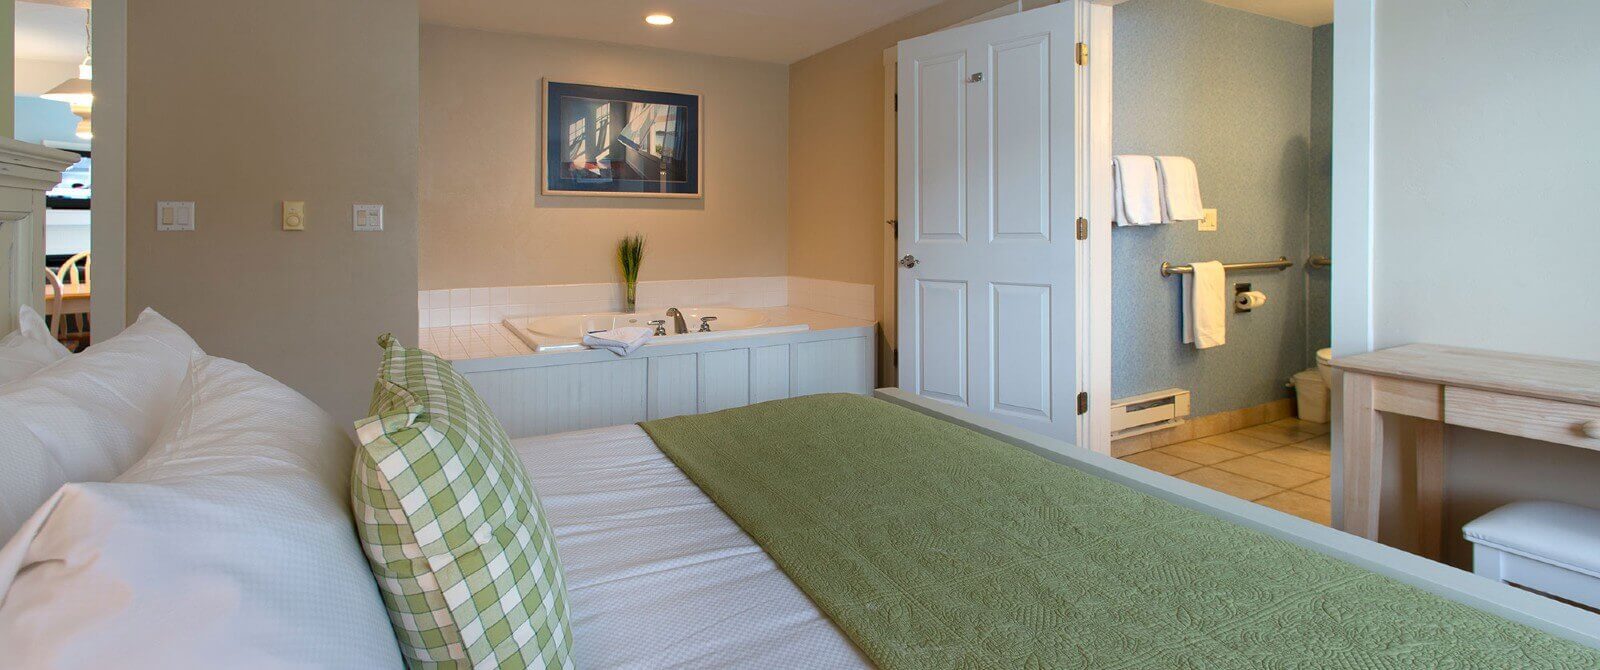 Elegant bedroom with king bed in green and white linens, soaker tub and doorway into a bathroom